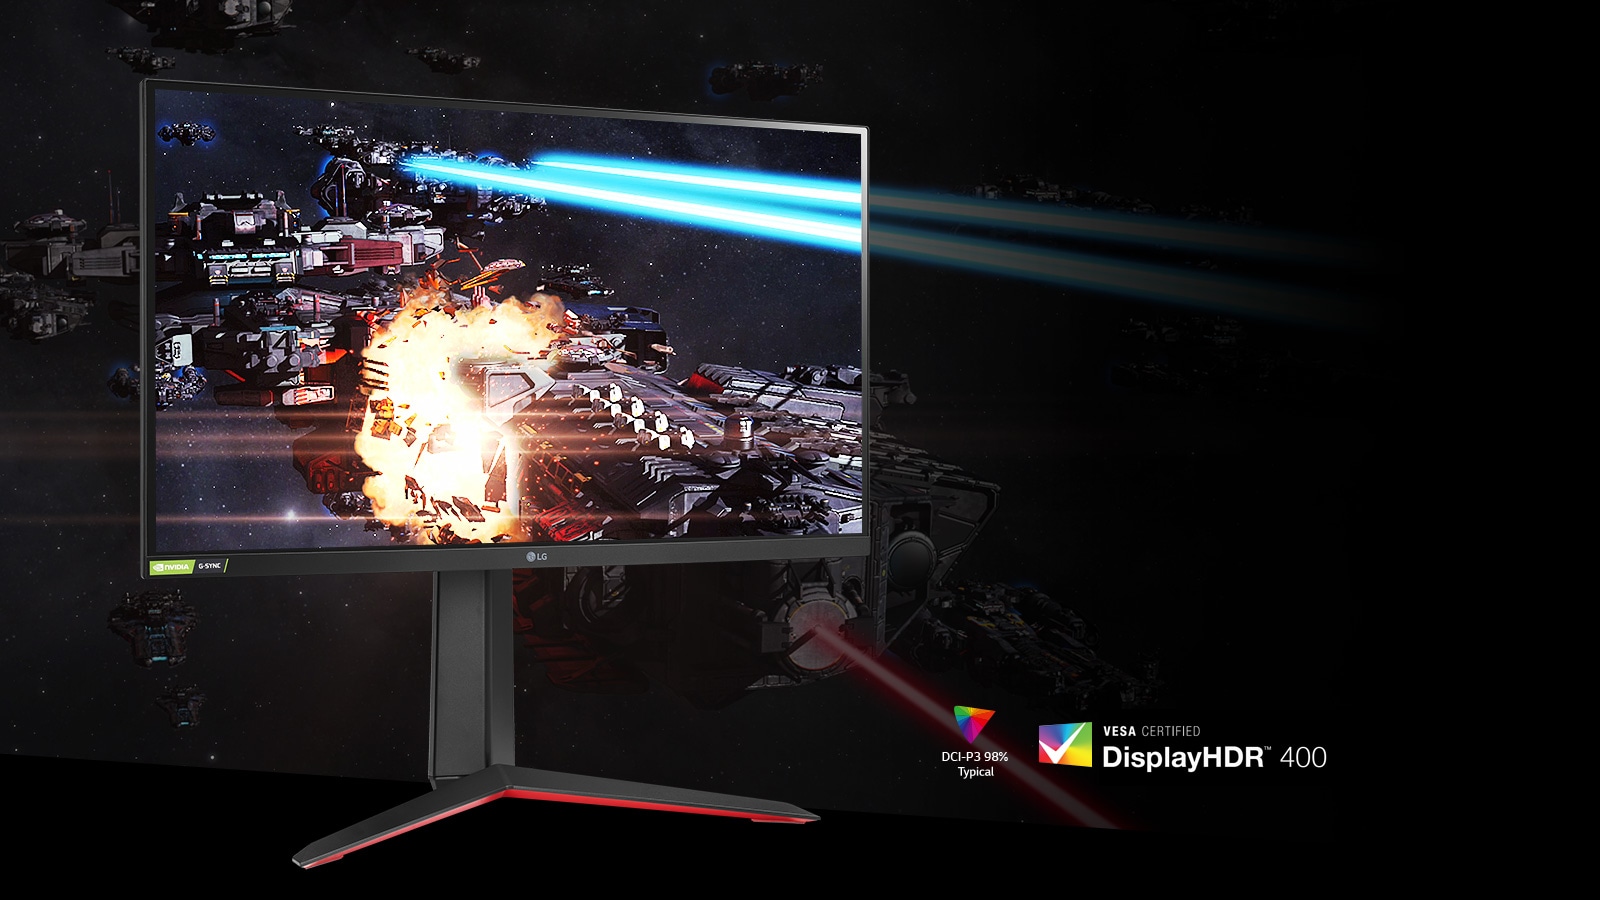 The Gaming Scene in Rich Colors and Contrast on The Monitor Supporting HDR400 With DCI-P3 98% (Typ.).